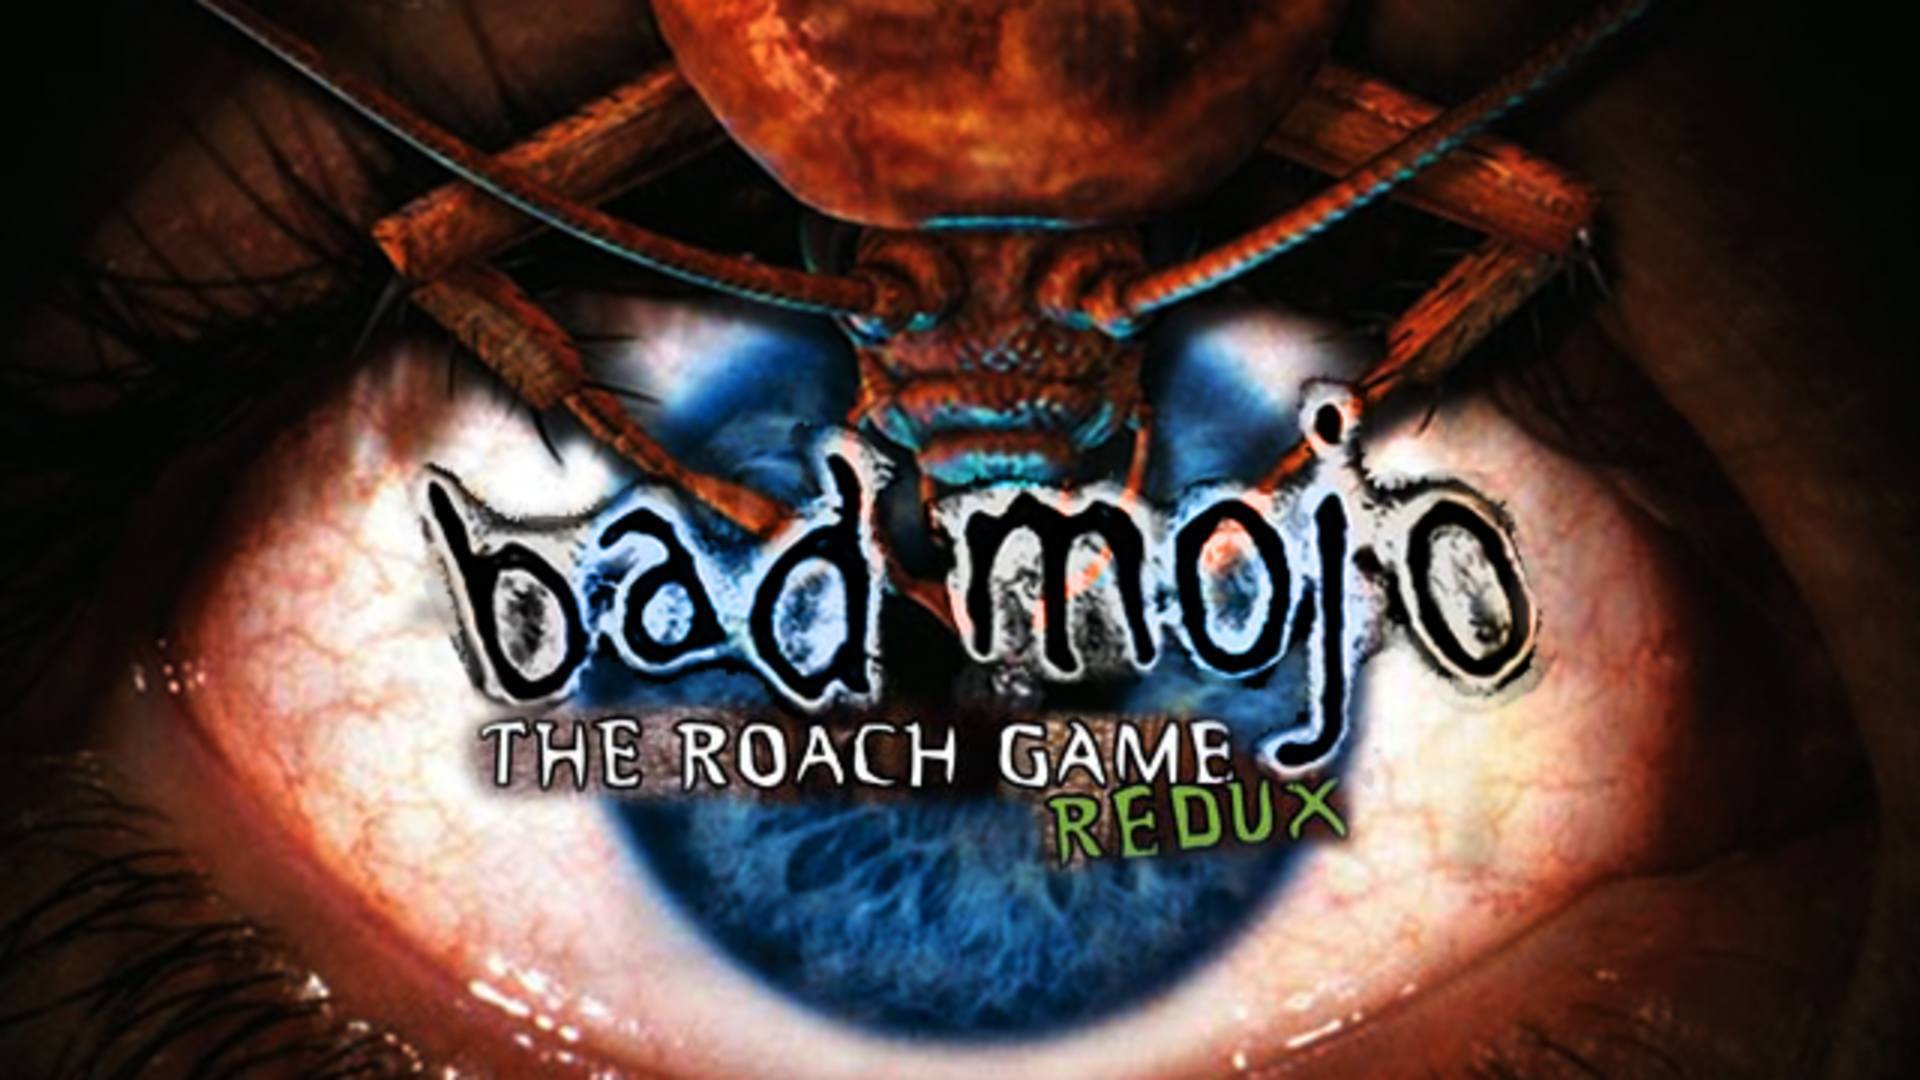 download bad mojo steam for free